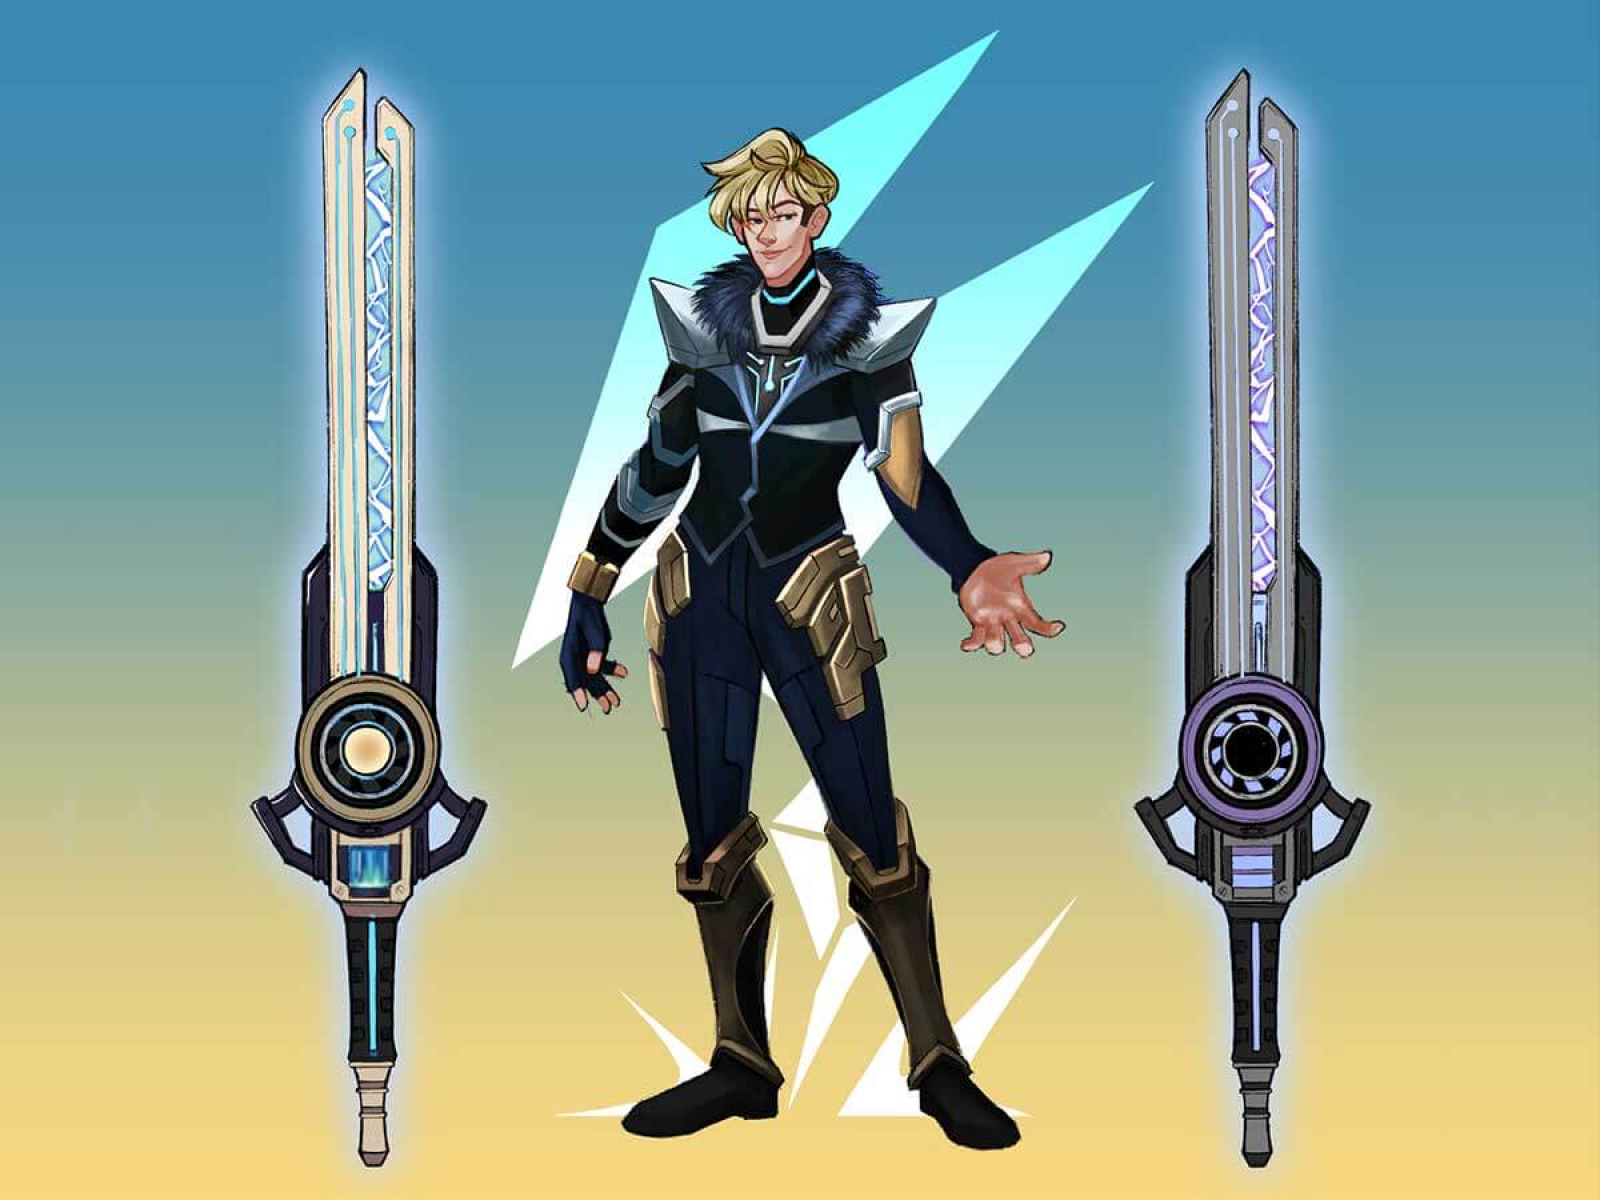 Art of a male character and his two swords.